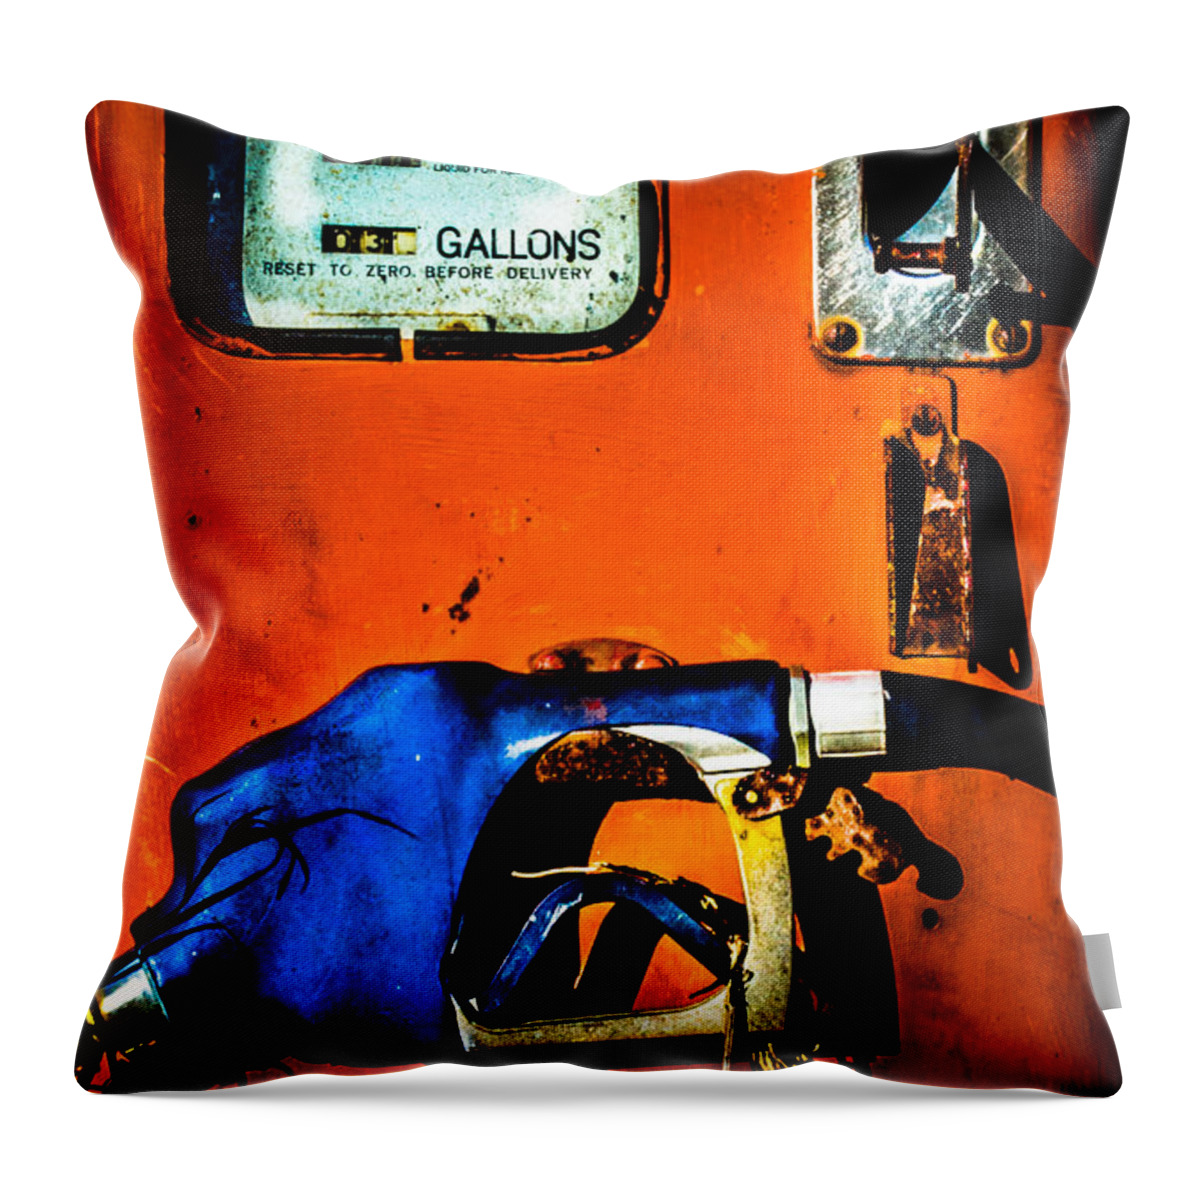 Barn Throw Pillow featuring the photograph Old Farm Gas Pump by Michael Arend